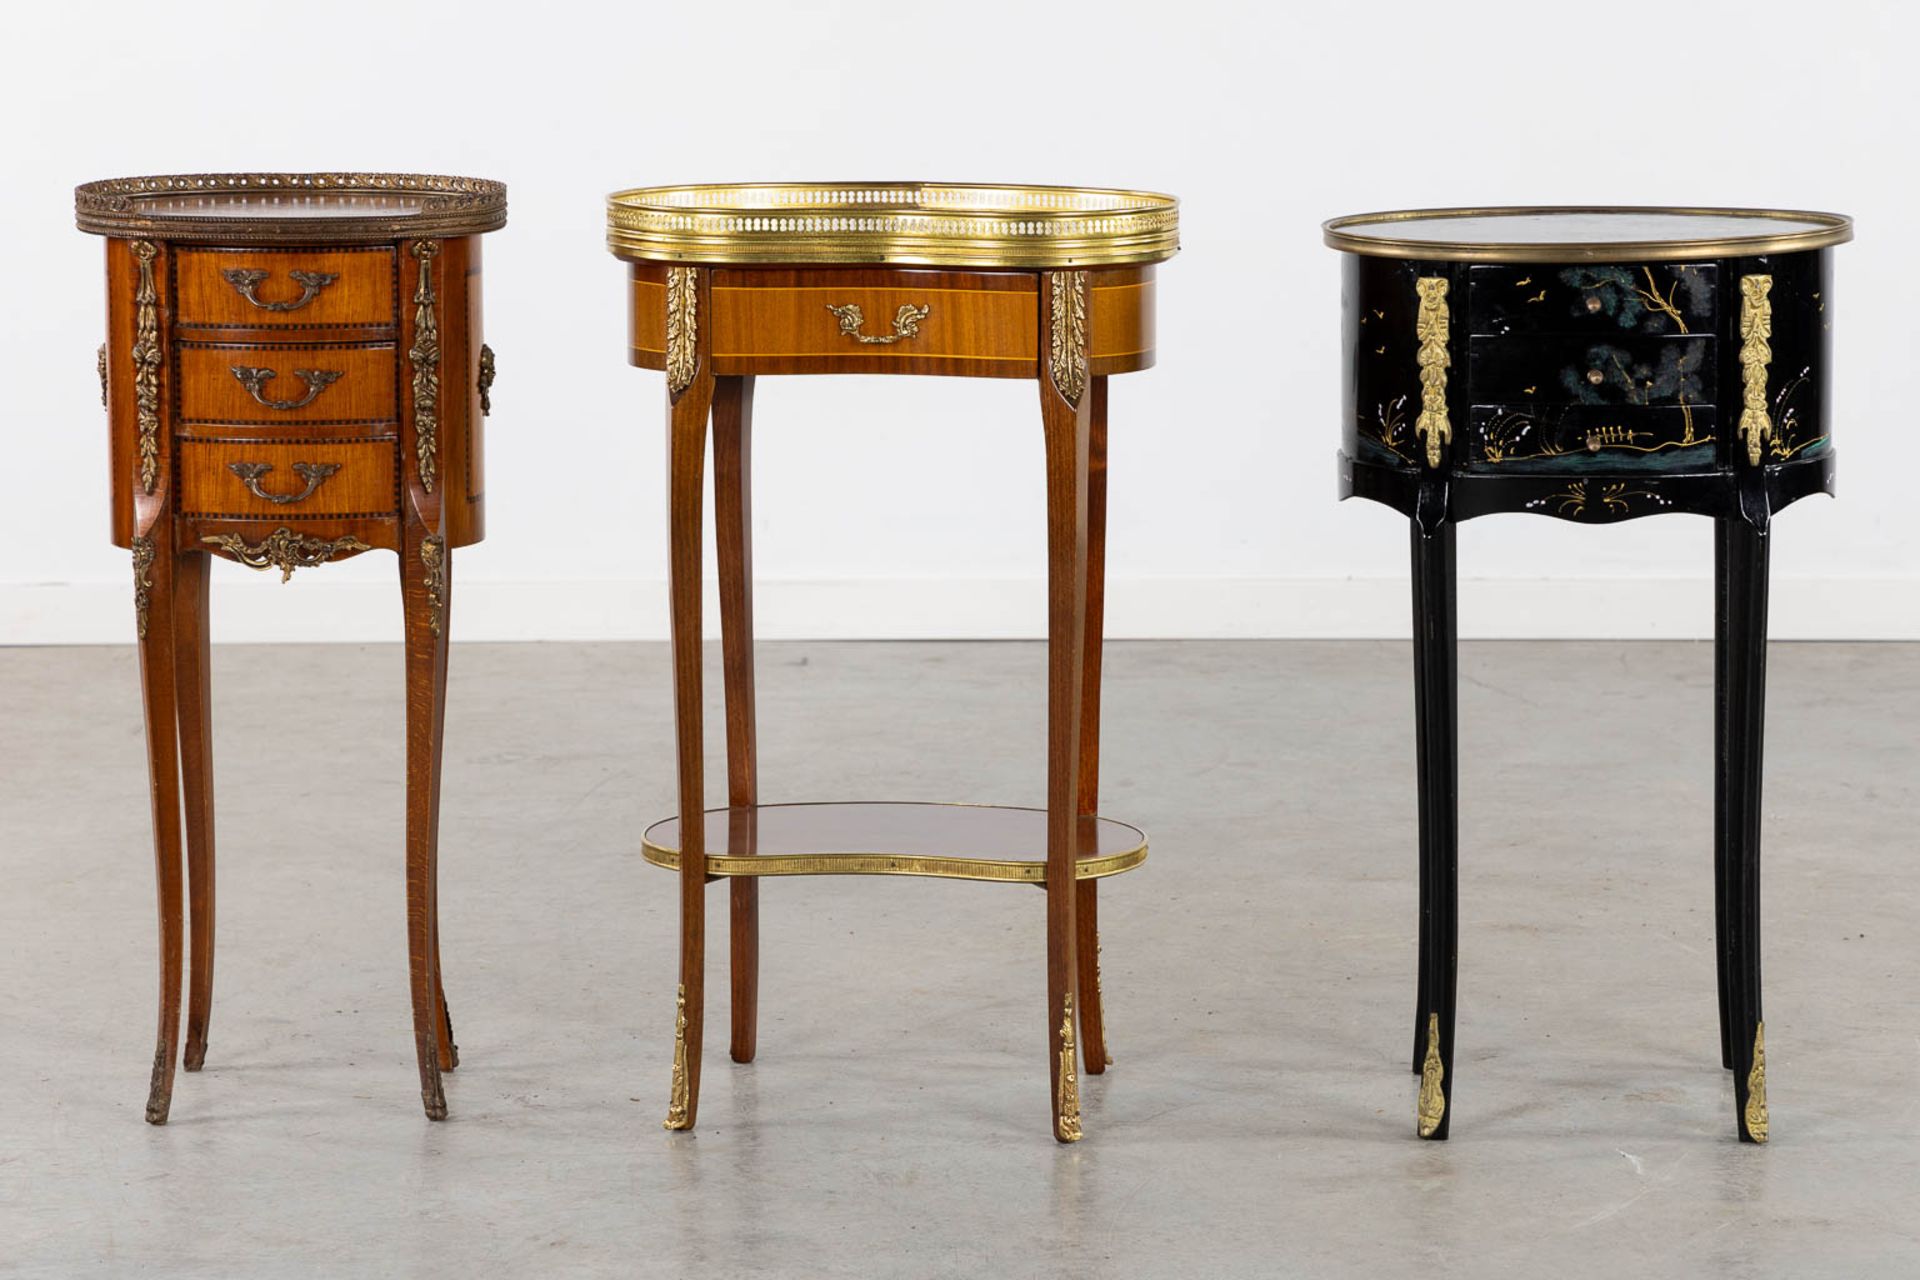 Three small side tables, marquetry and painted decor. 20th C. (L:30 x W:44 x H:71 cm) - Bild 4 aus 14